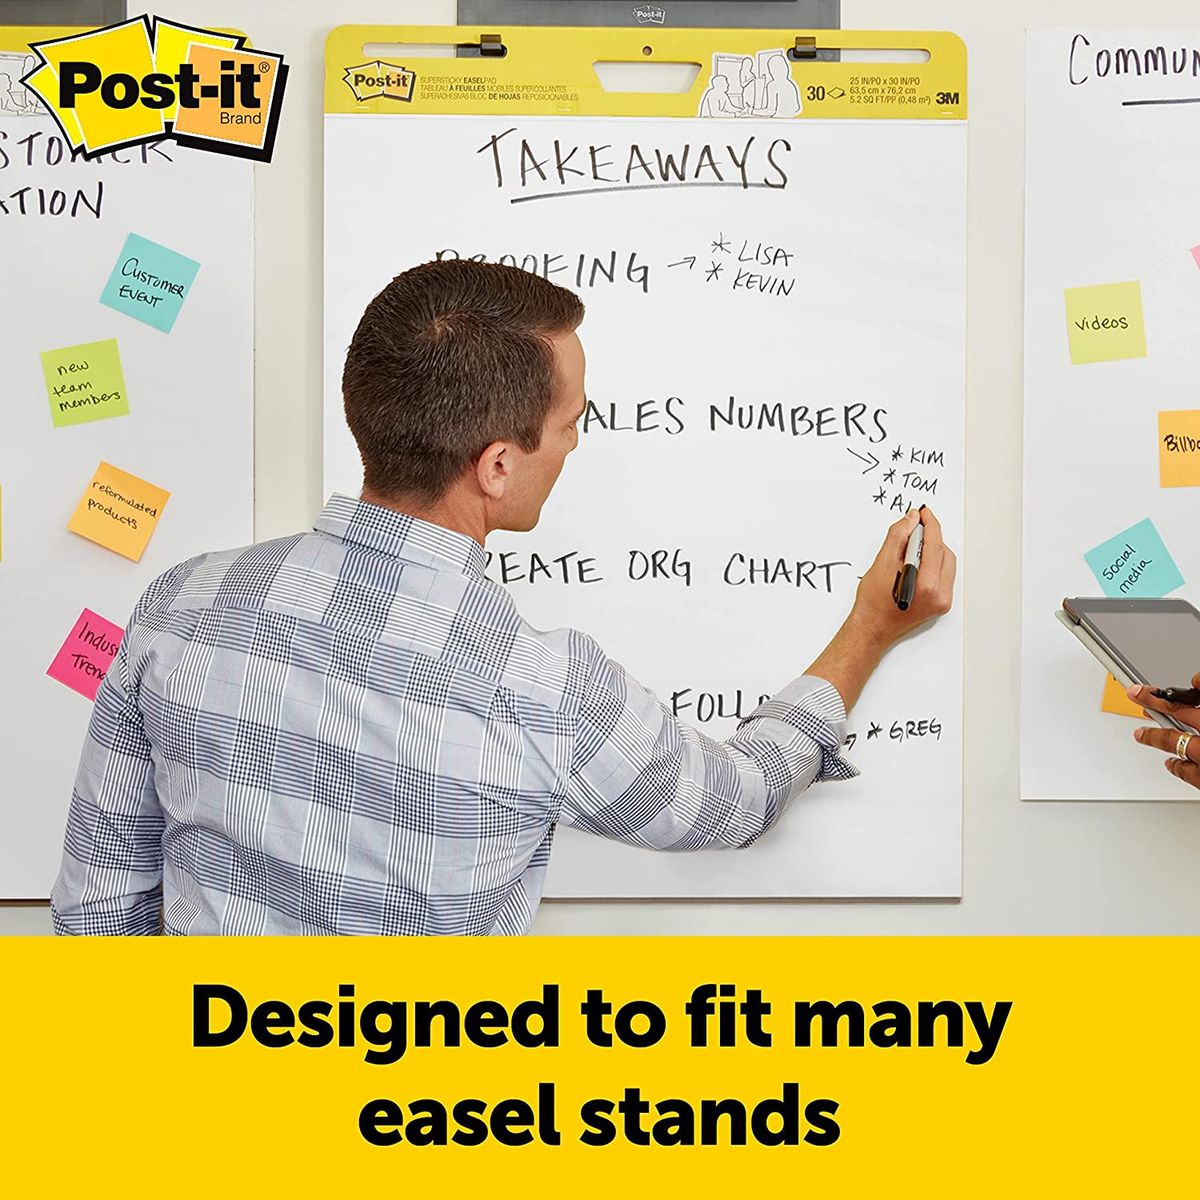 3M Post-it Super Sticky Easel Pad, 25 x 30 Inches, 30 Sheets/Pad